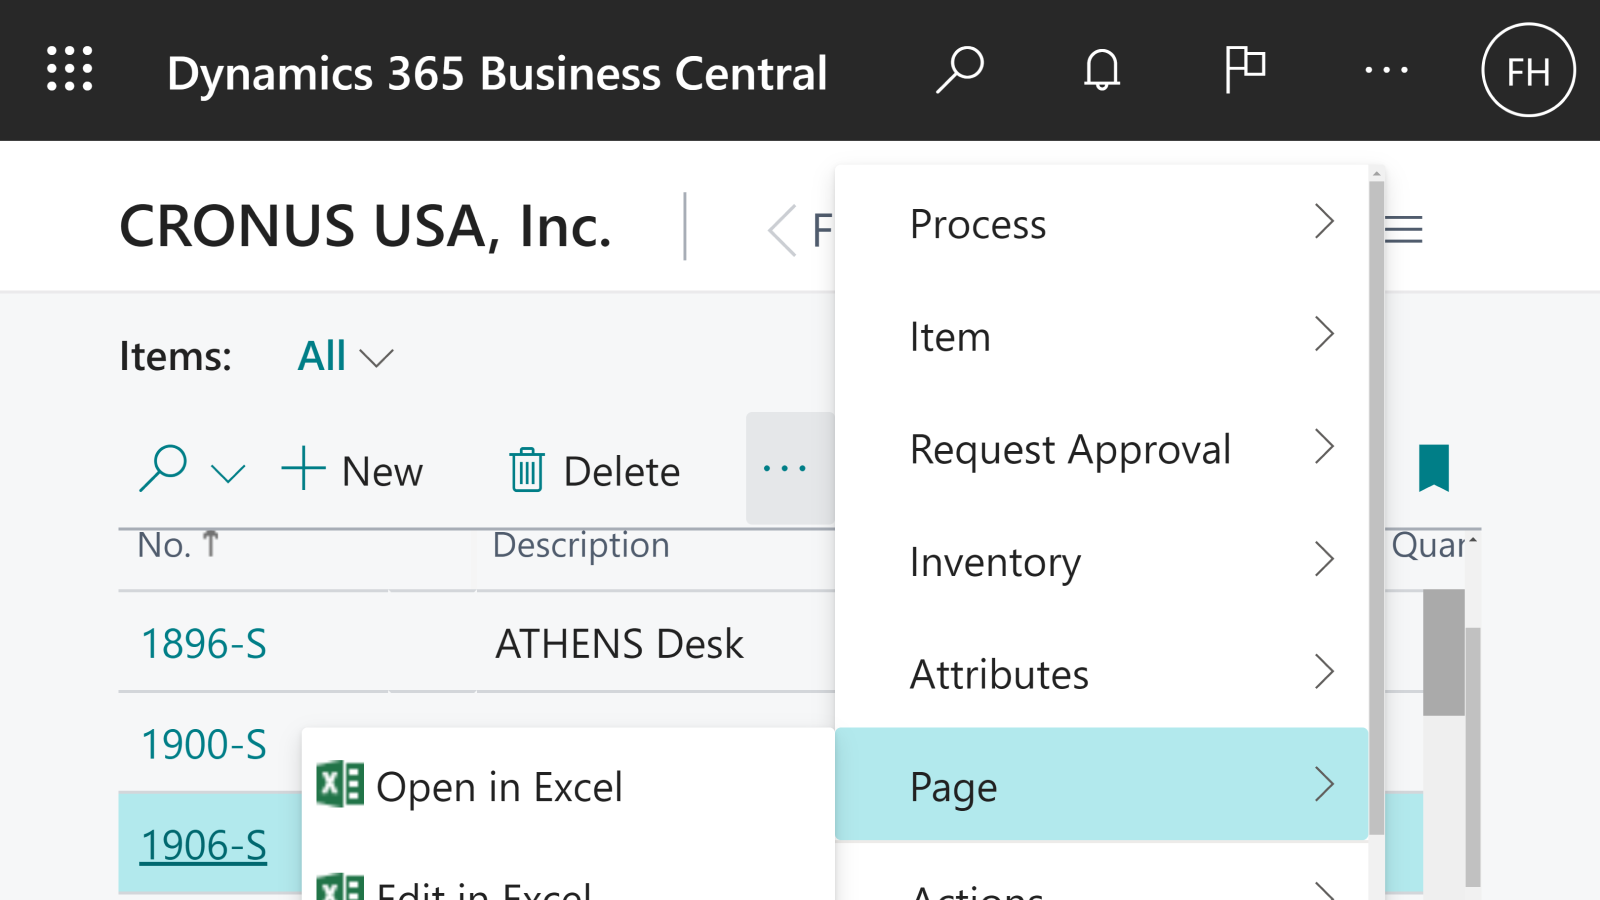 Connect your data with Microsoft 365 dynamics 365 business central sales and order management